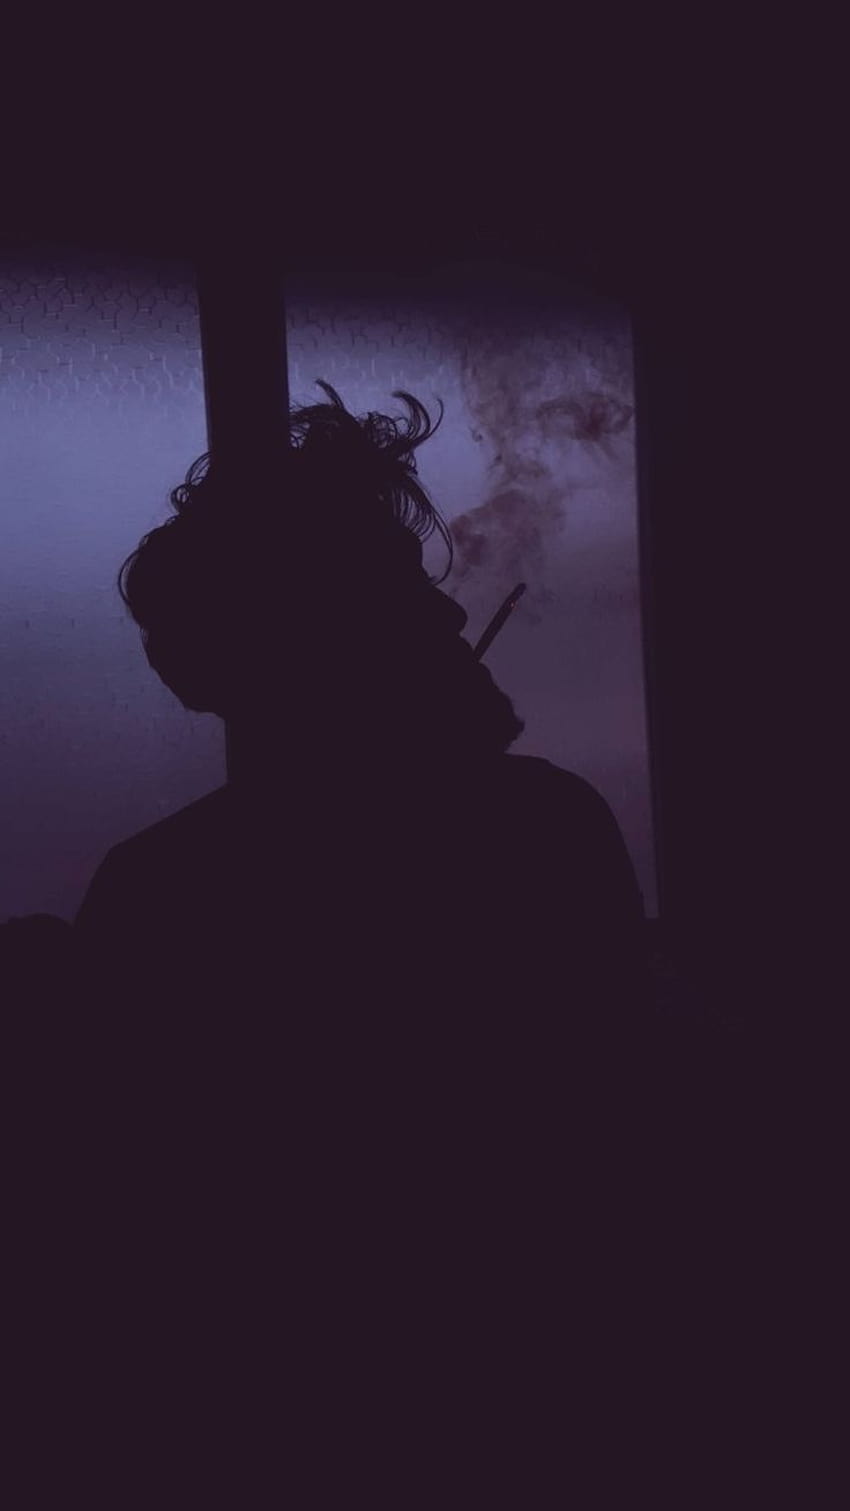 A man smoking in the dark with his back to us - Smoke